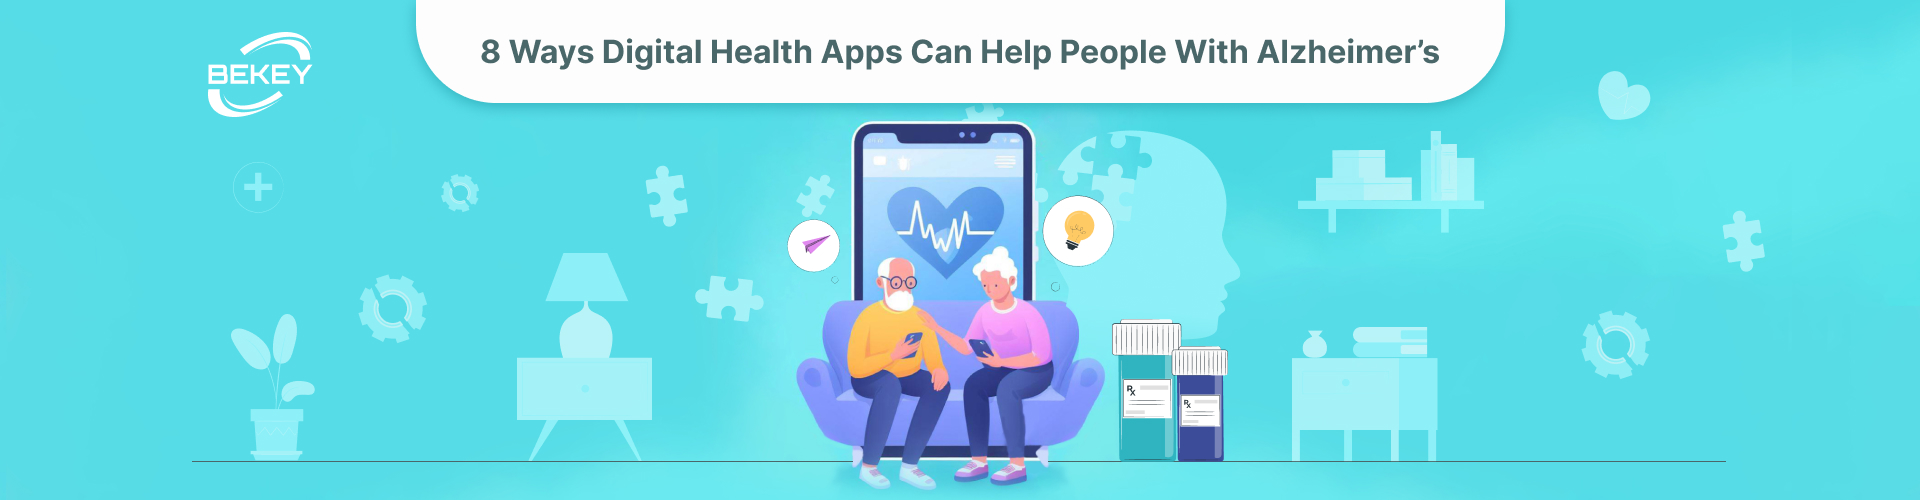 8 Ways Digital Health Apps Can Help People With Alzheimer’s - image